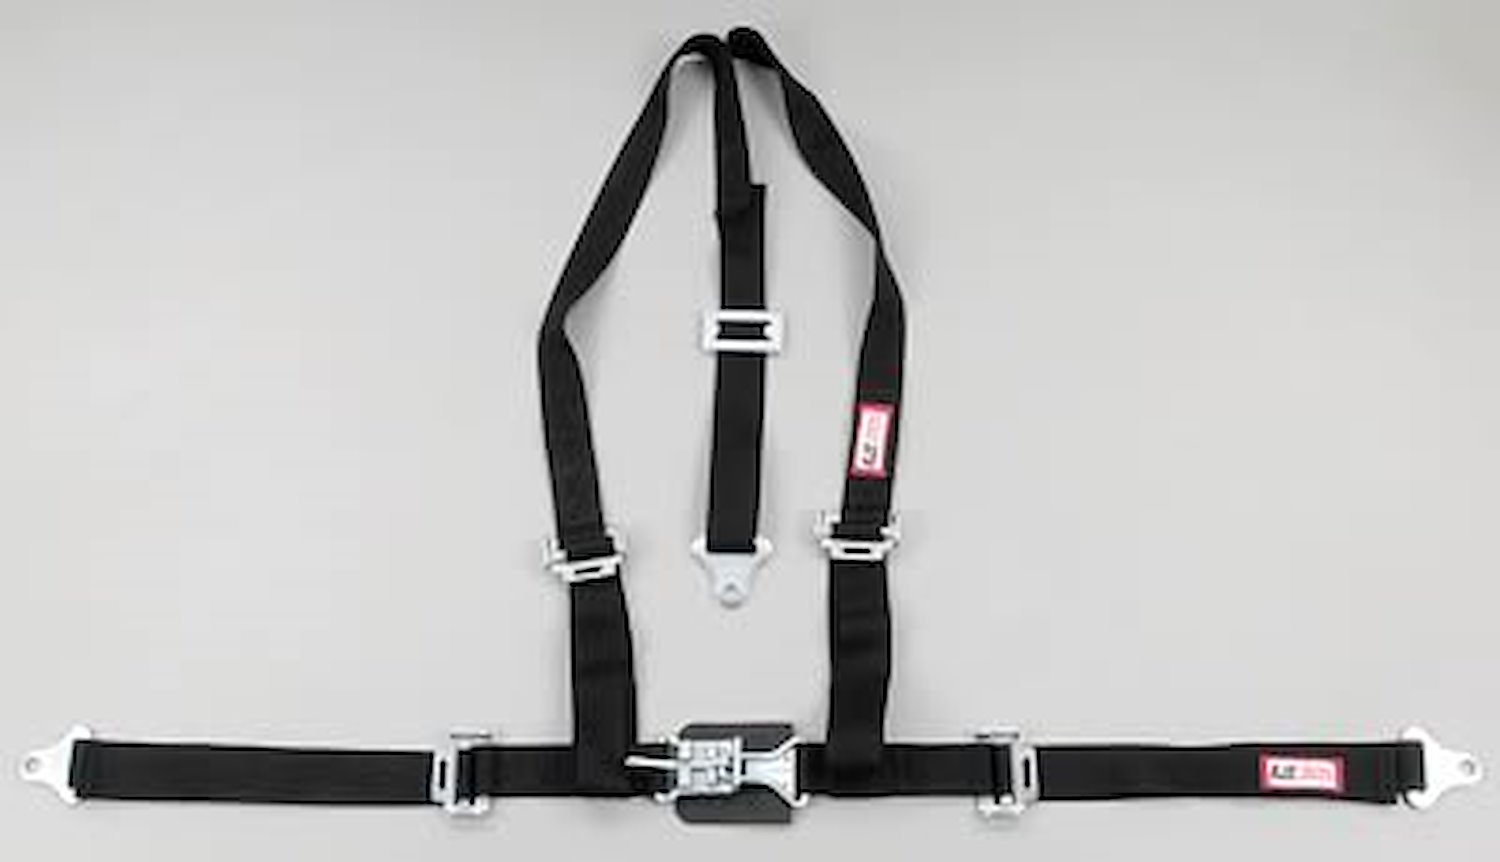 NON-SFI L&L HARNESS 2 PULL DOWN Lap Belt SNAP SEWN IN 2 S.H. Individual ROLL BAR Mount WRAP/SNAP RED